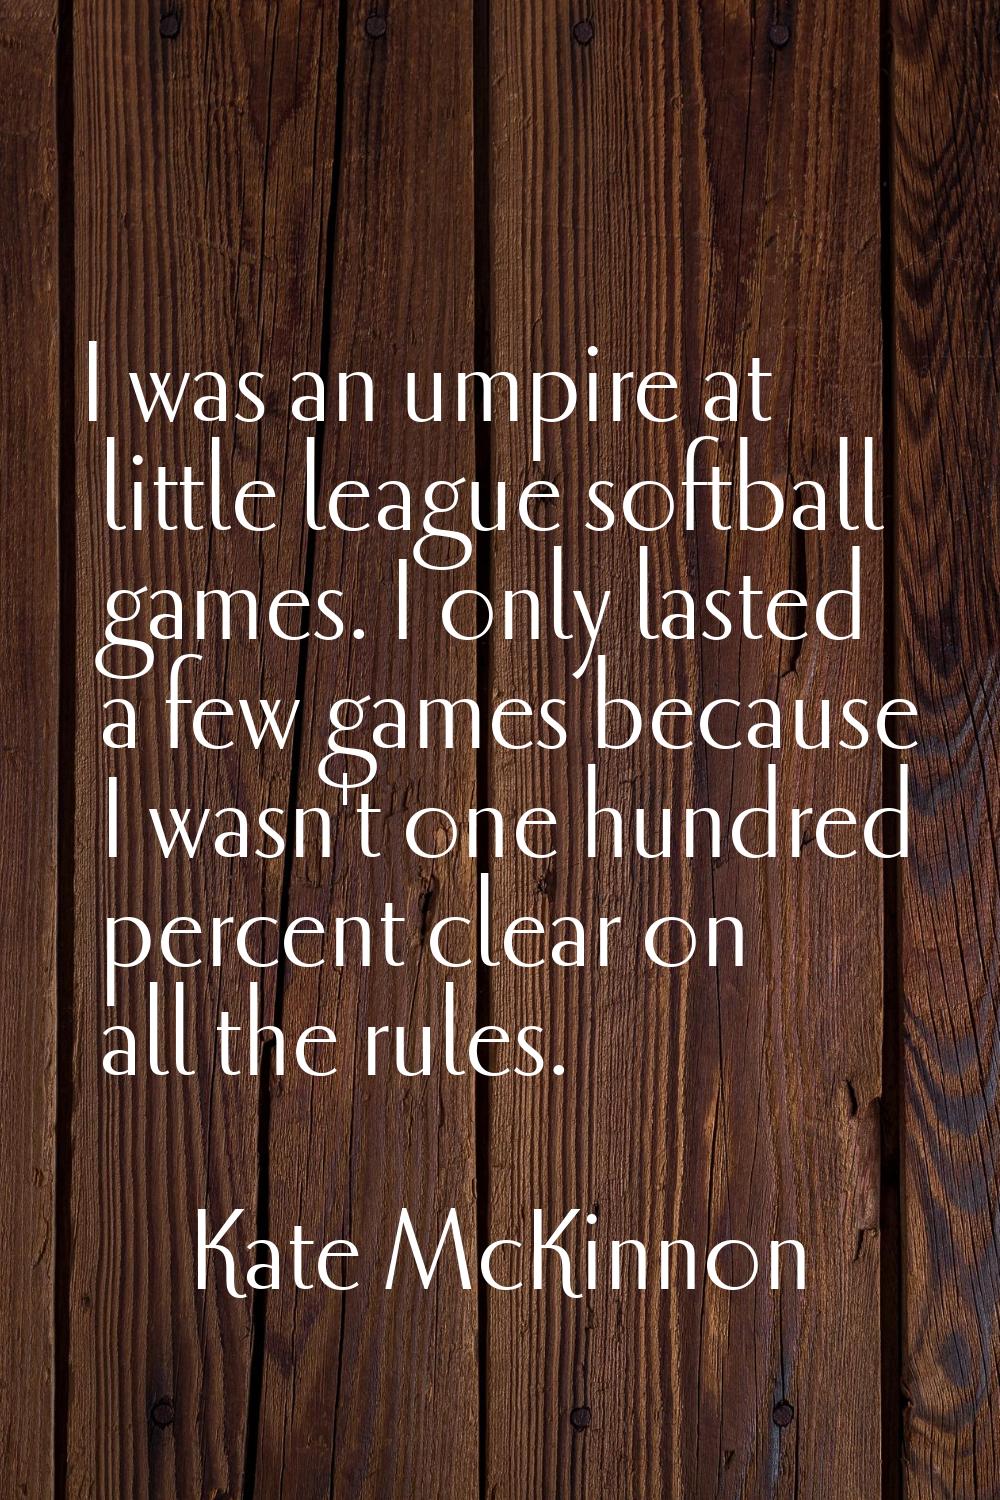 I was an umpire at little league softball games. I only lasted a few games because I wasn't one hun